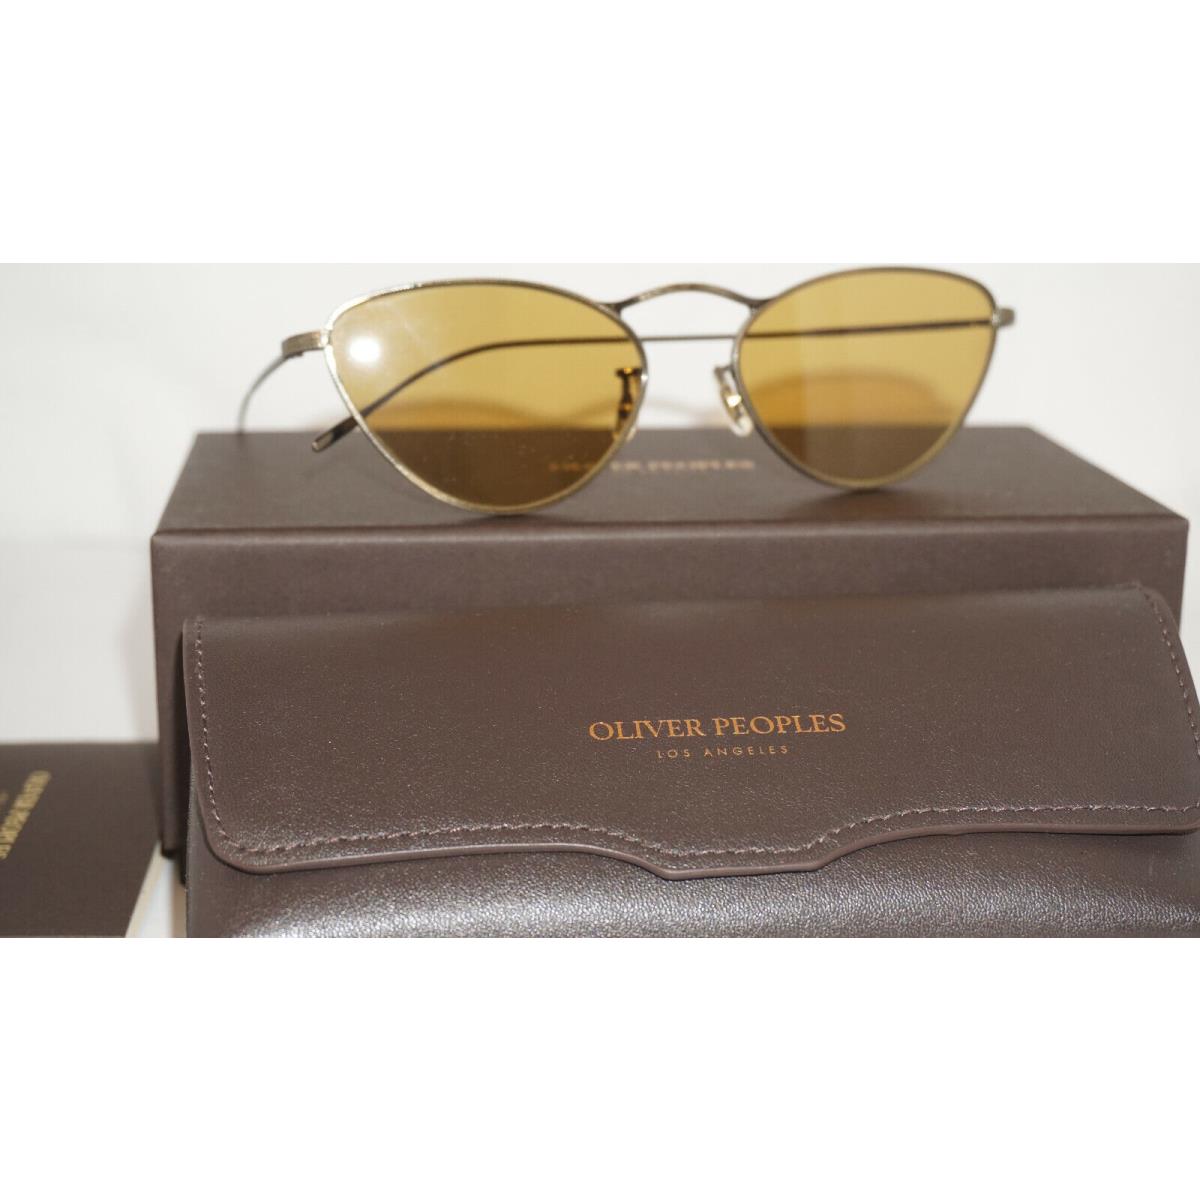 Oilver Peoples Sunglasses Antique Gold Deep Amber OV1239S 528453 56 145